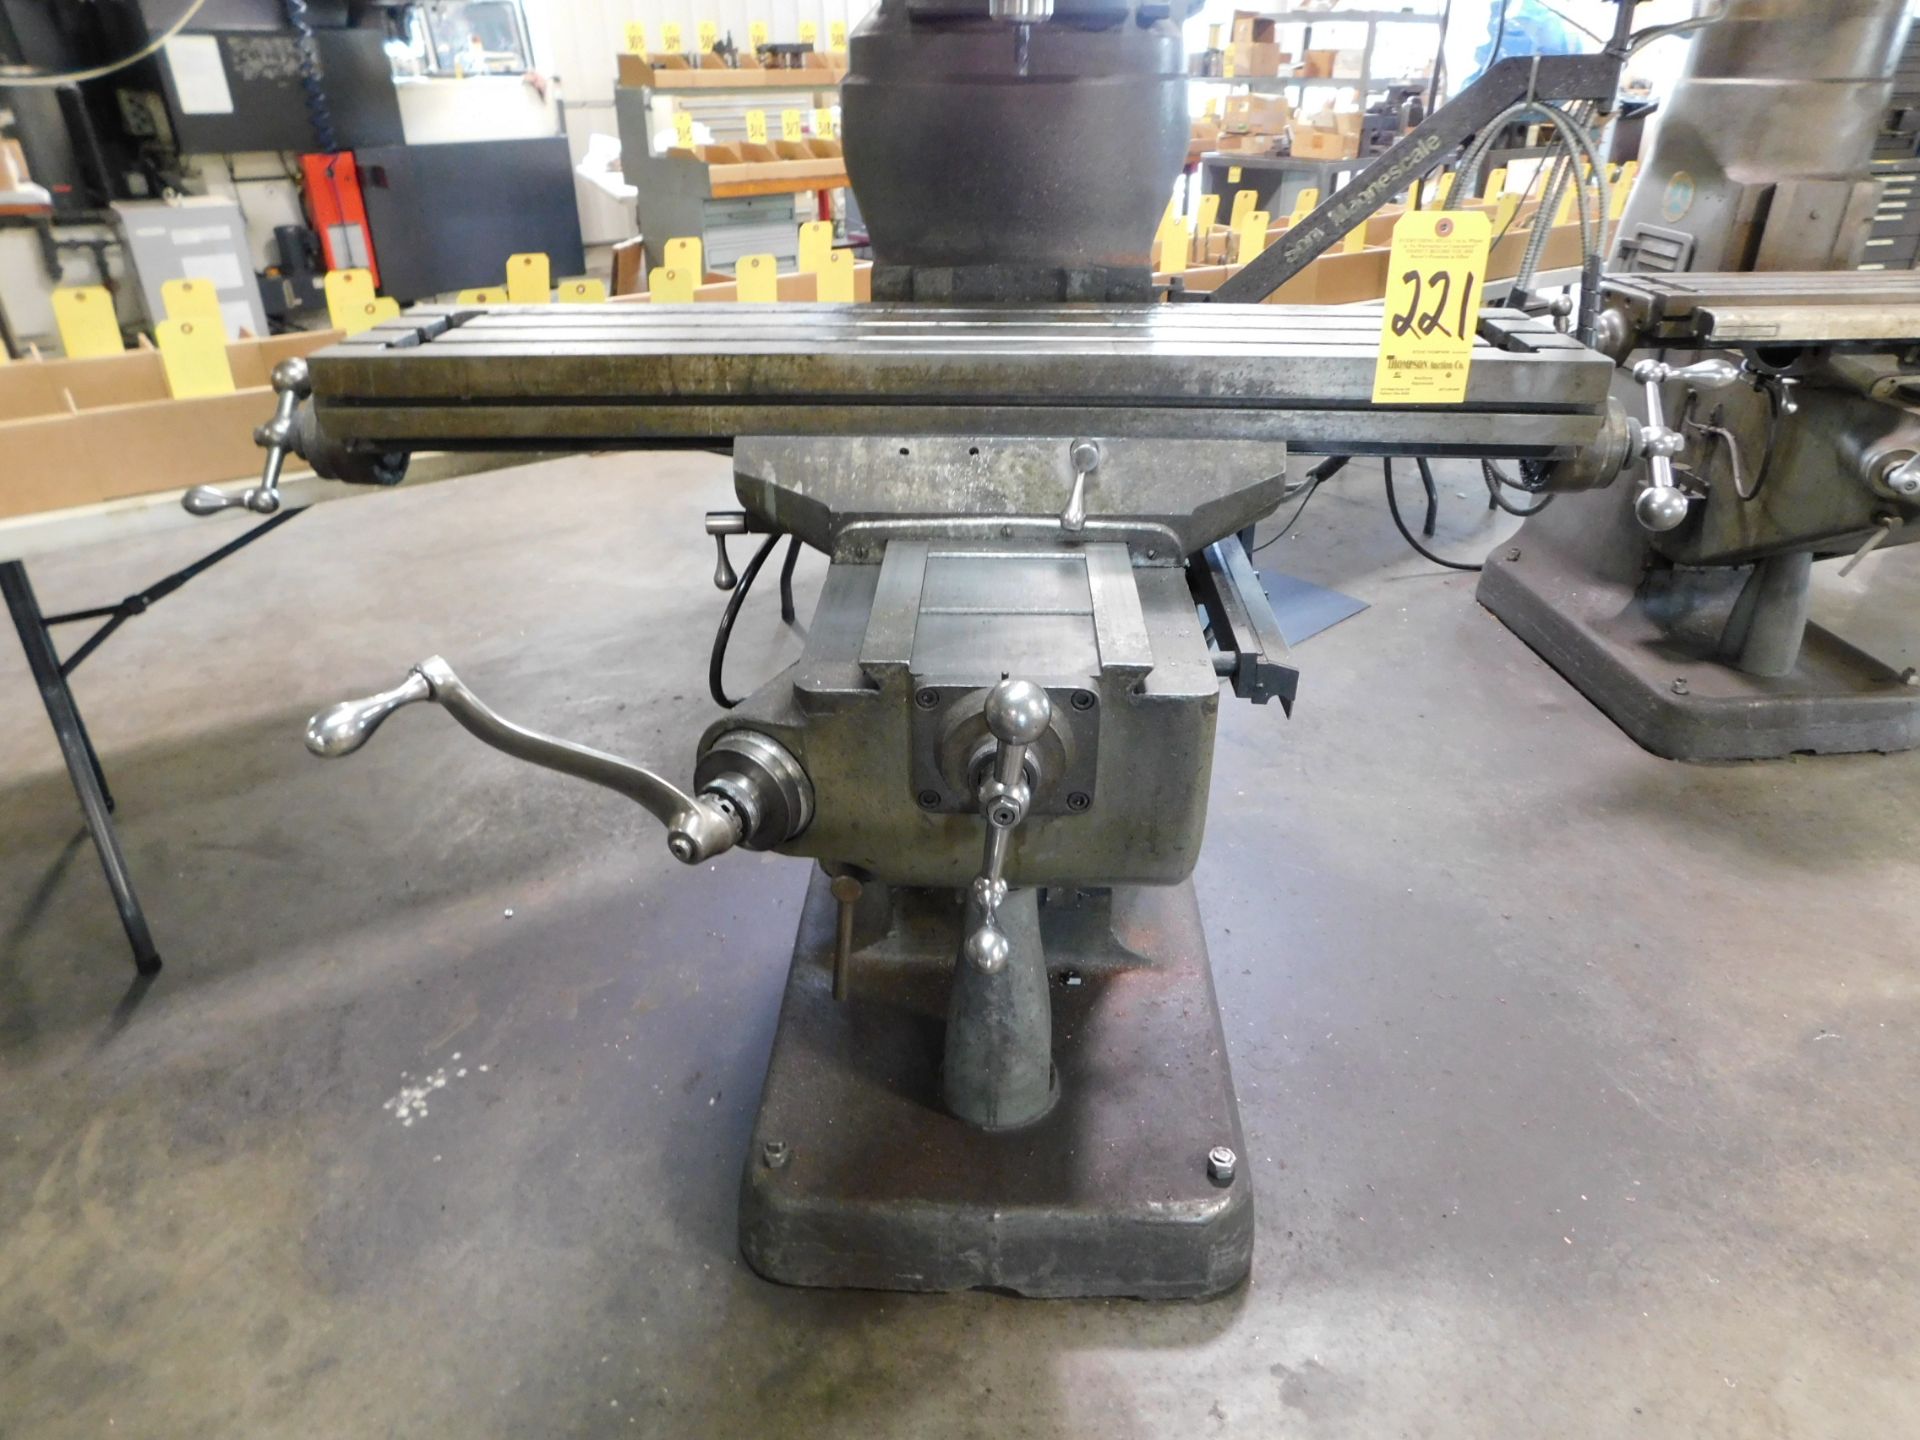 Bridgeport 1H.P. Step Pulley Vertical Mill sn#12BR139963, 9"X42" Table, R-8 Collets, Sony 2-Axis - Image 7 of 12